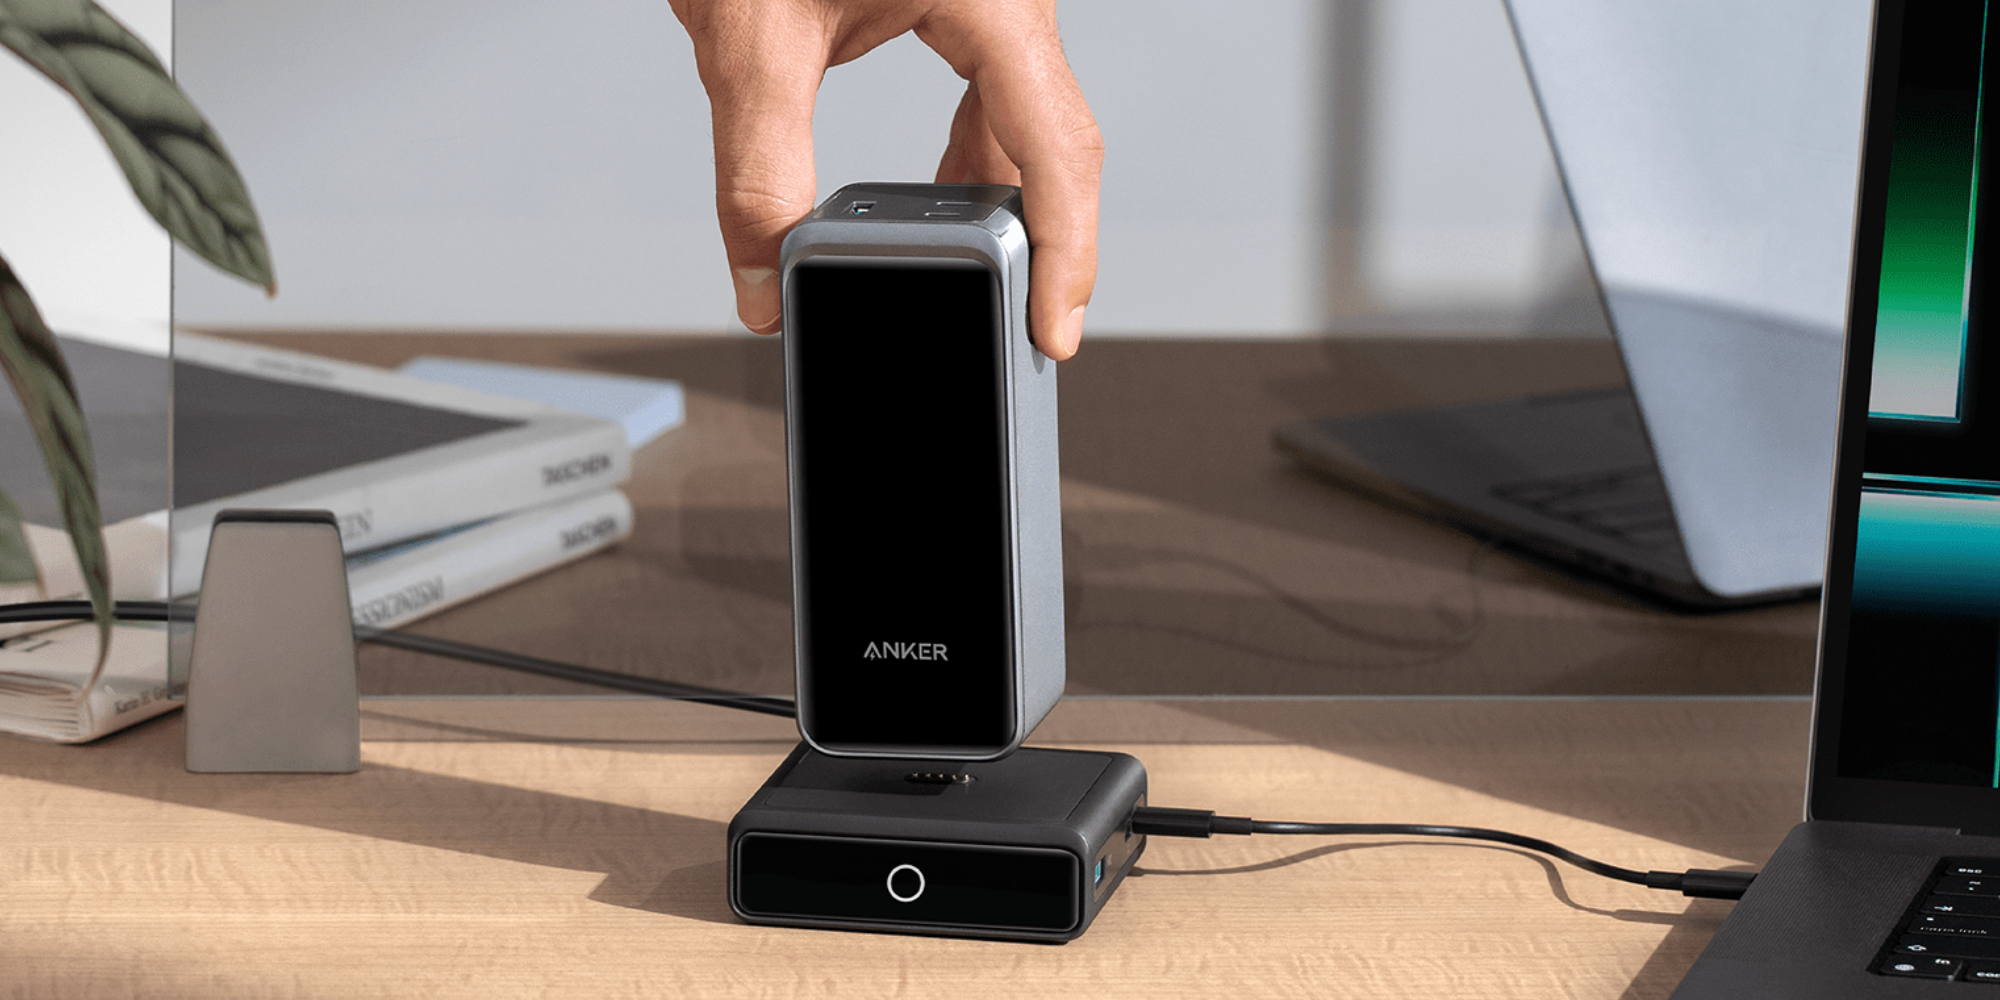 Anker Prime chargers and power banks on the way